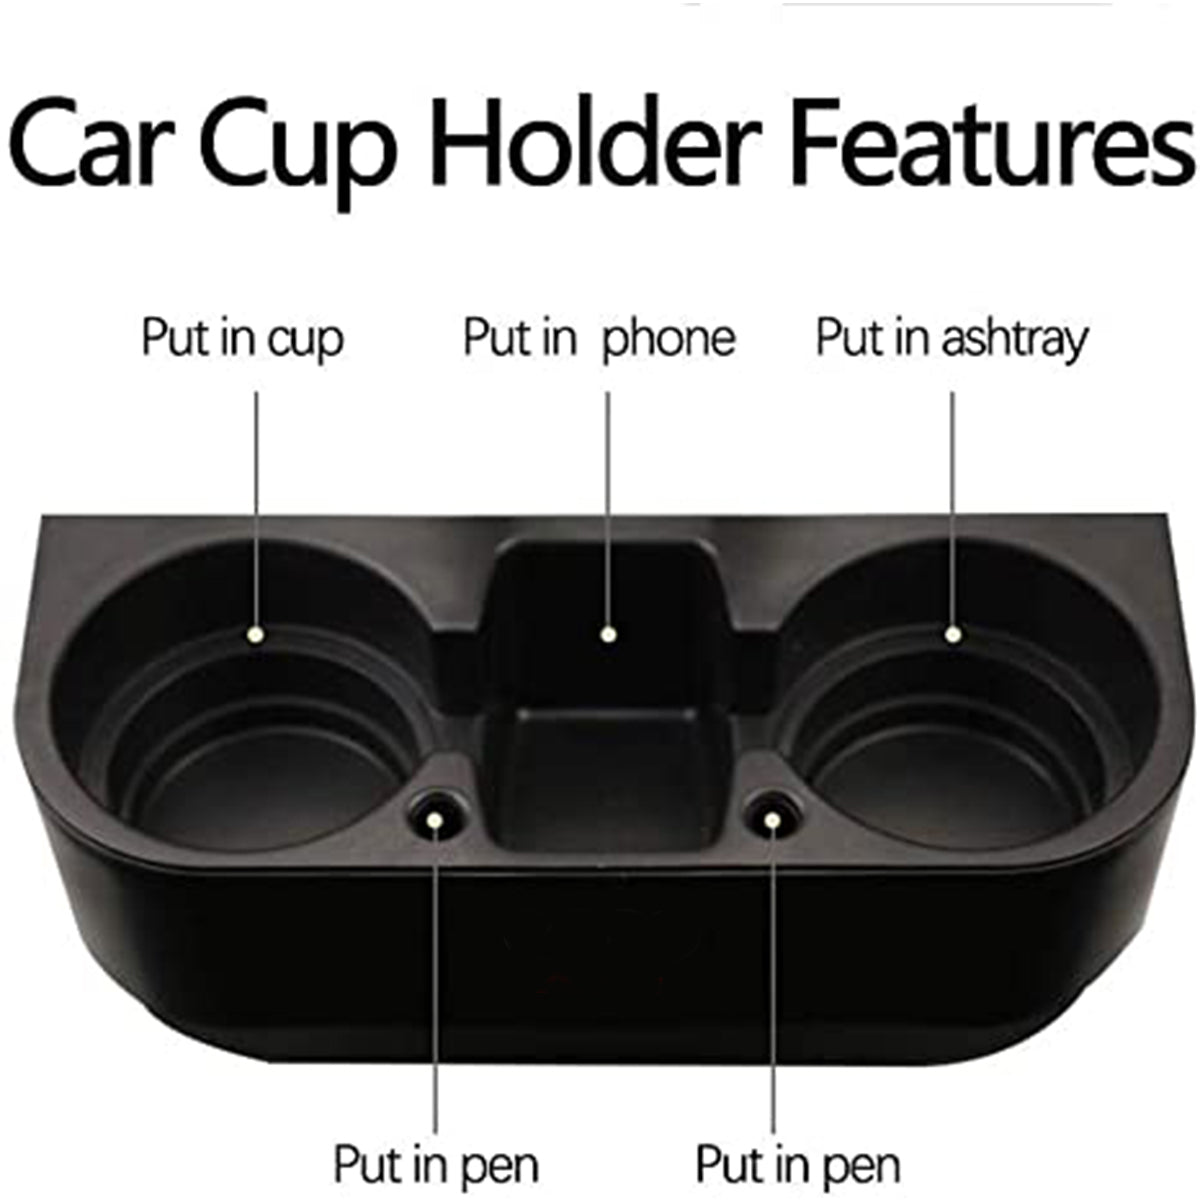 Delicate Leather Cup Holder Portable Multifunction Vehicle Seat Cup Cell Phone Drinks Holder Box Car Interior Organizer, Custom For Your Cars, Car Accessories DA11995 - Delicate Leather